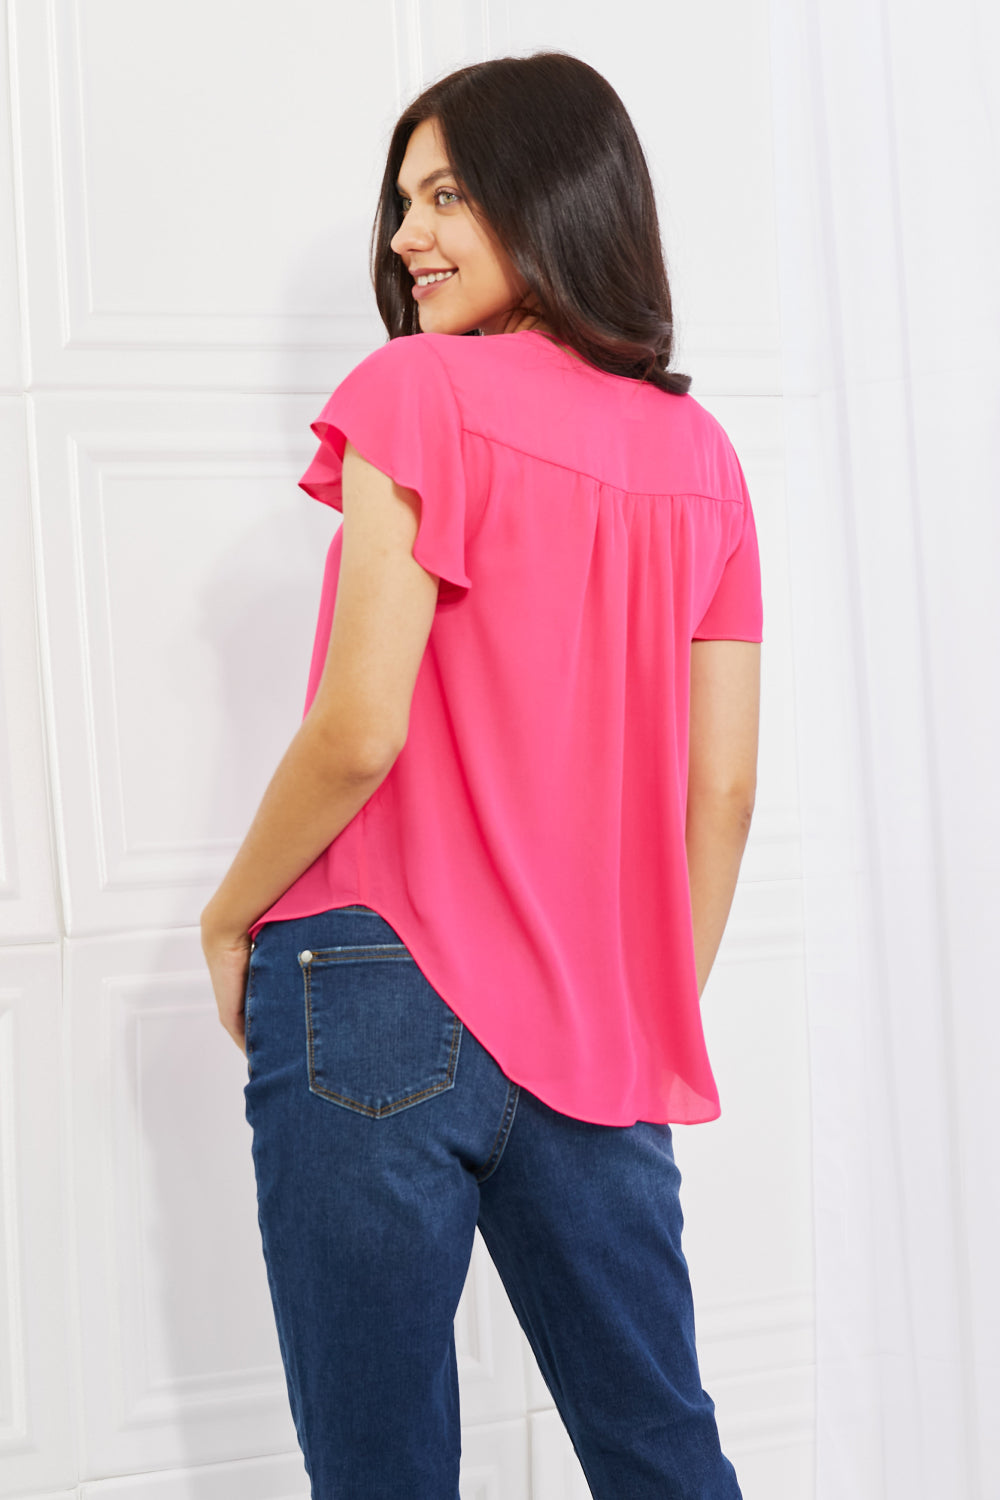 Just For You Full Size Short Ruffled Sleeve Length Top in Hot Pink - Women’s Clothing & Accessories - Shirts & Tops